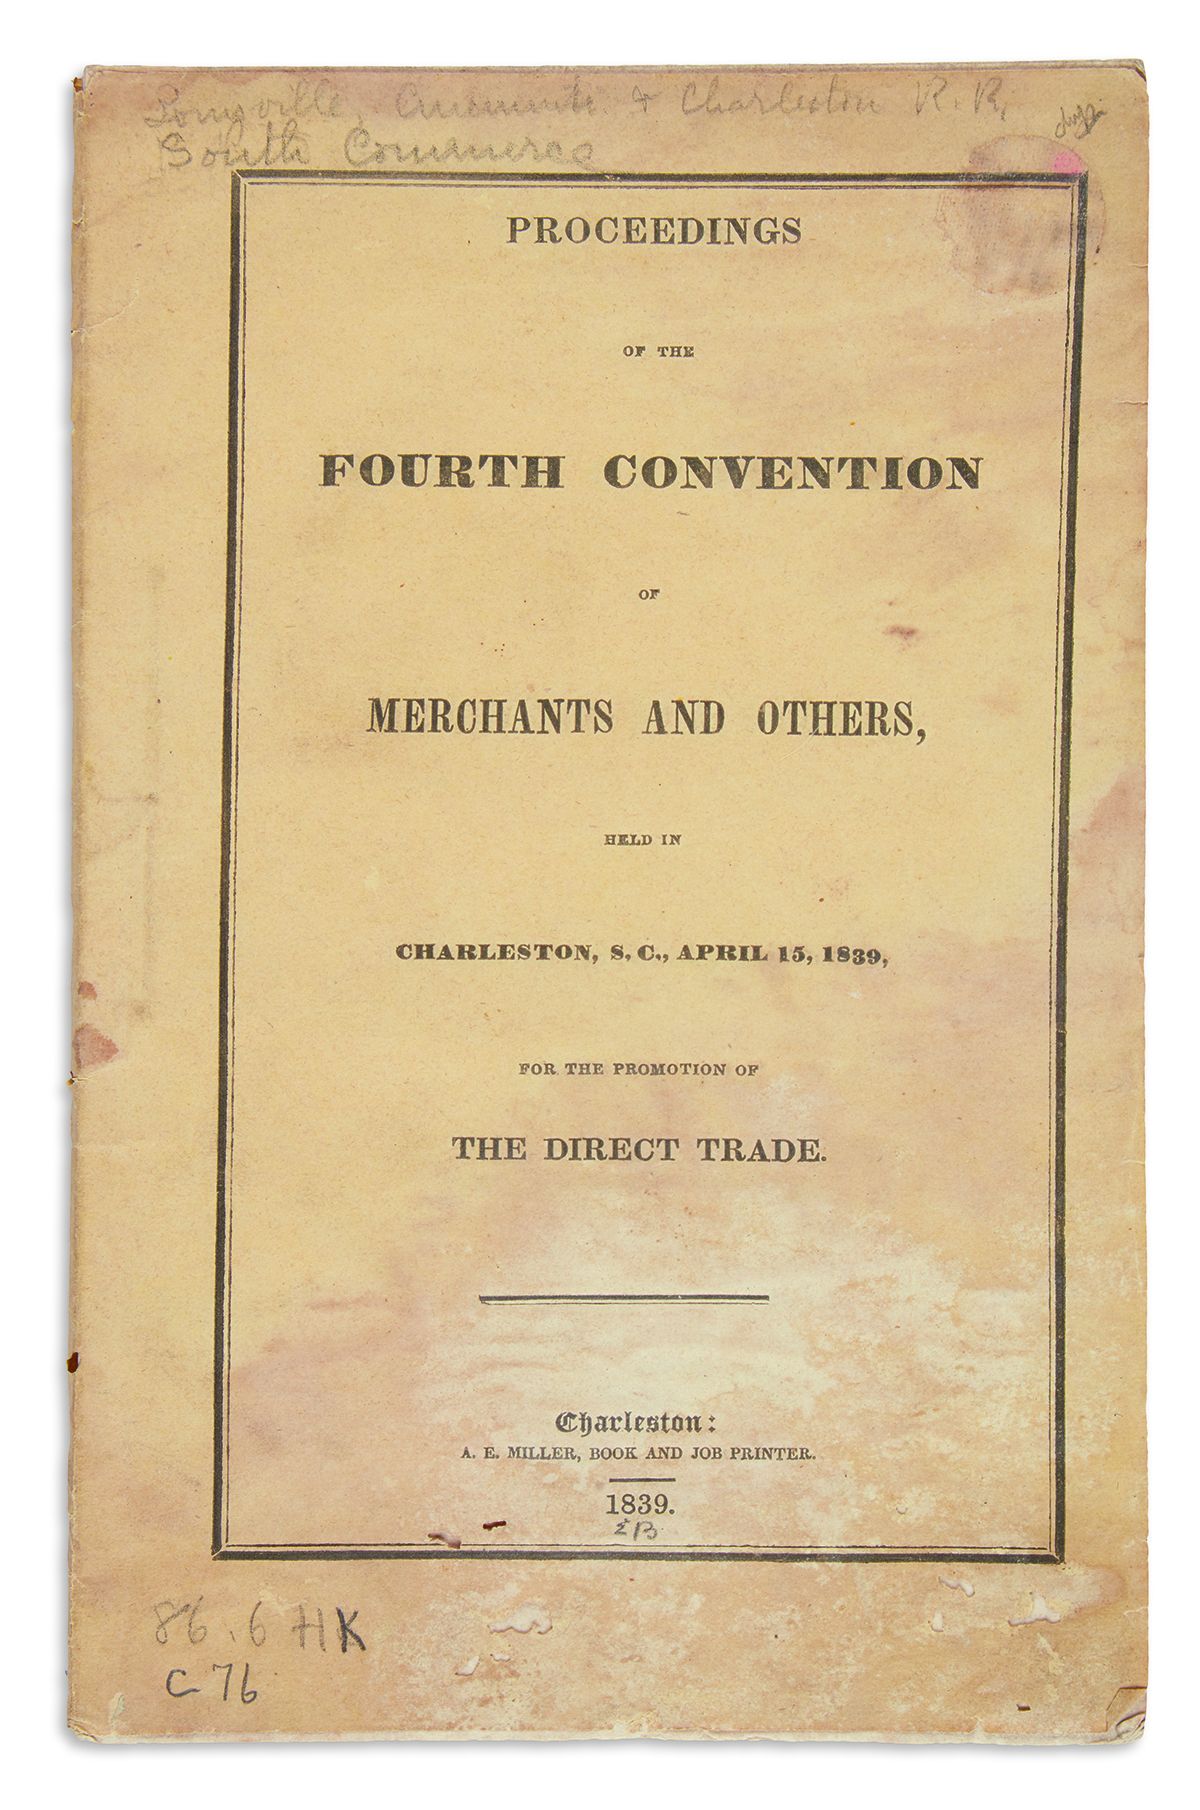 Proceedings of the Fourth Convention of Merchants and Others. Held in Charleston